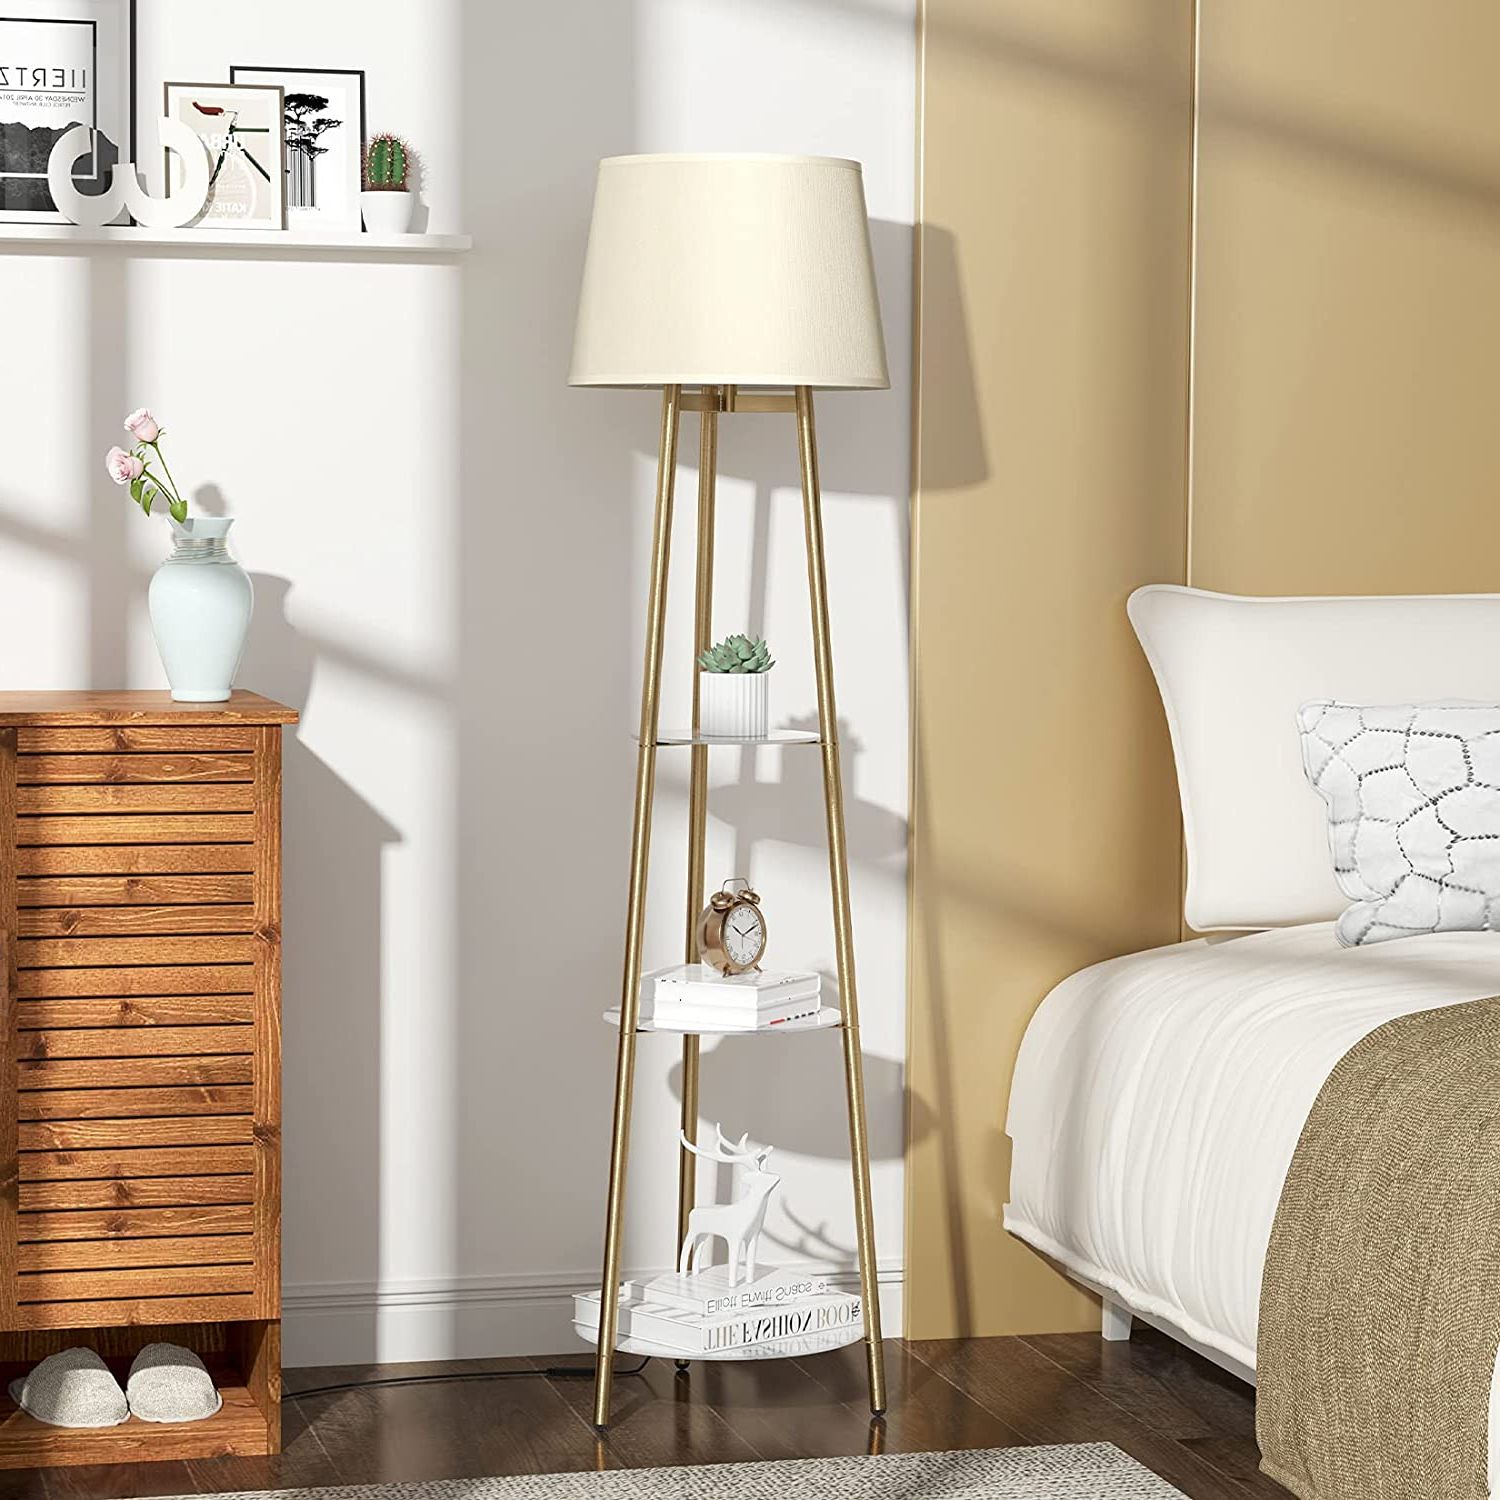 3 Tier Standing Lamps Intended For Well Known Luvodi Standing Floor Lamp With Shelves 3 Tier Tripod Standing Lamp With  Lampshade Golden Frame Modern Faux Marble Display Shelf Reading Lamp For  Living Room, Bedroom, Office. Plug In Powered : Amazon.co (View 6 of 10)